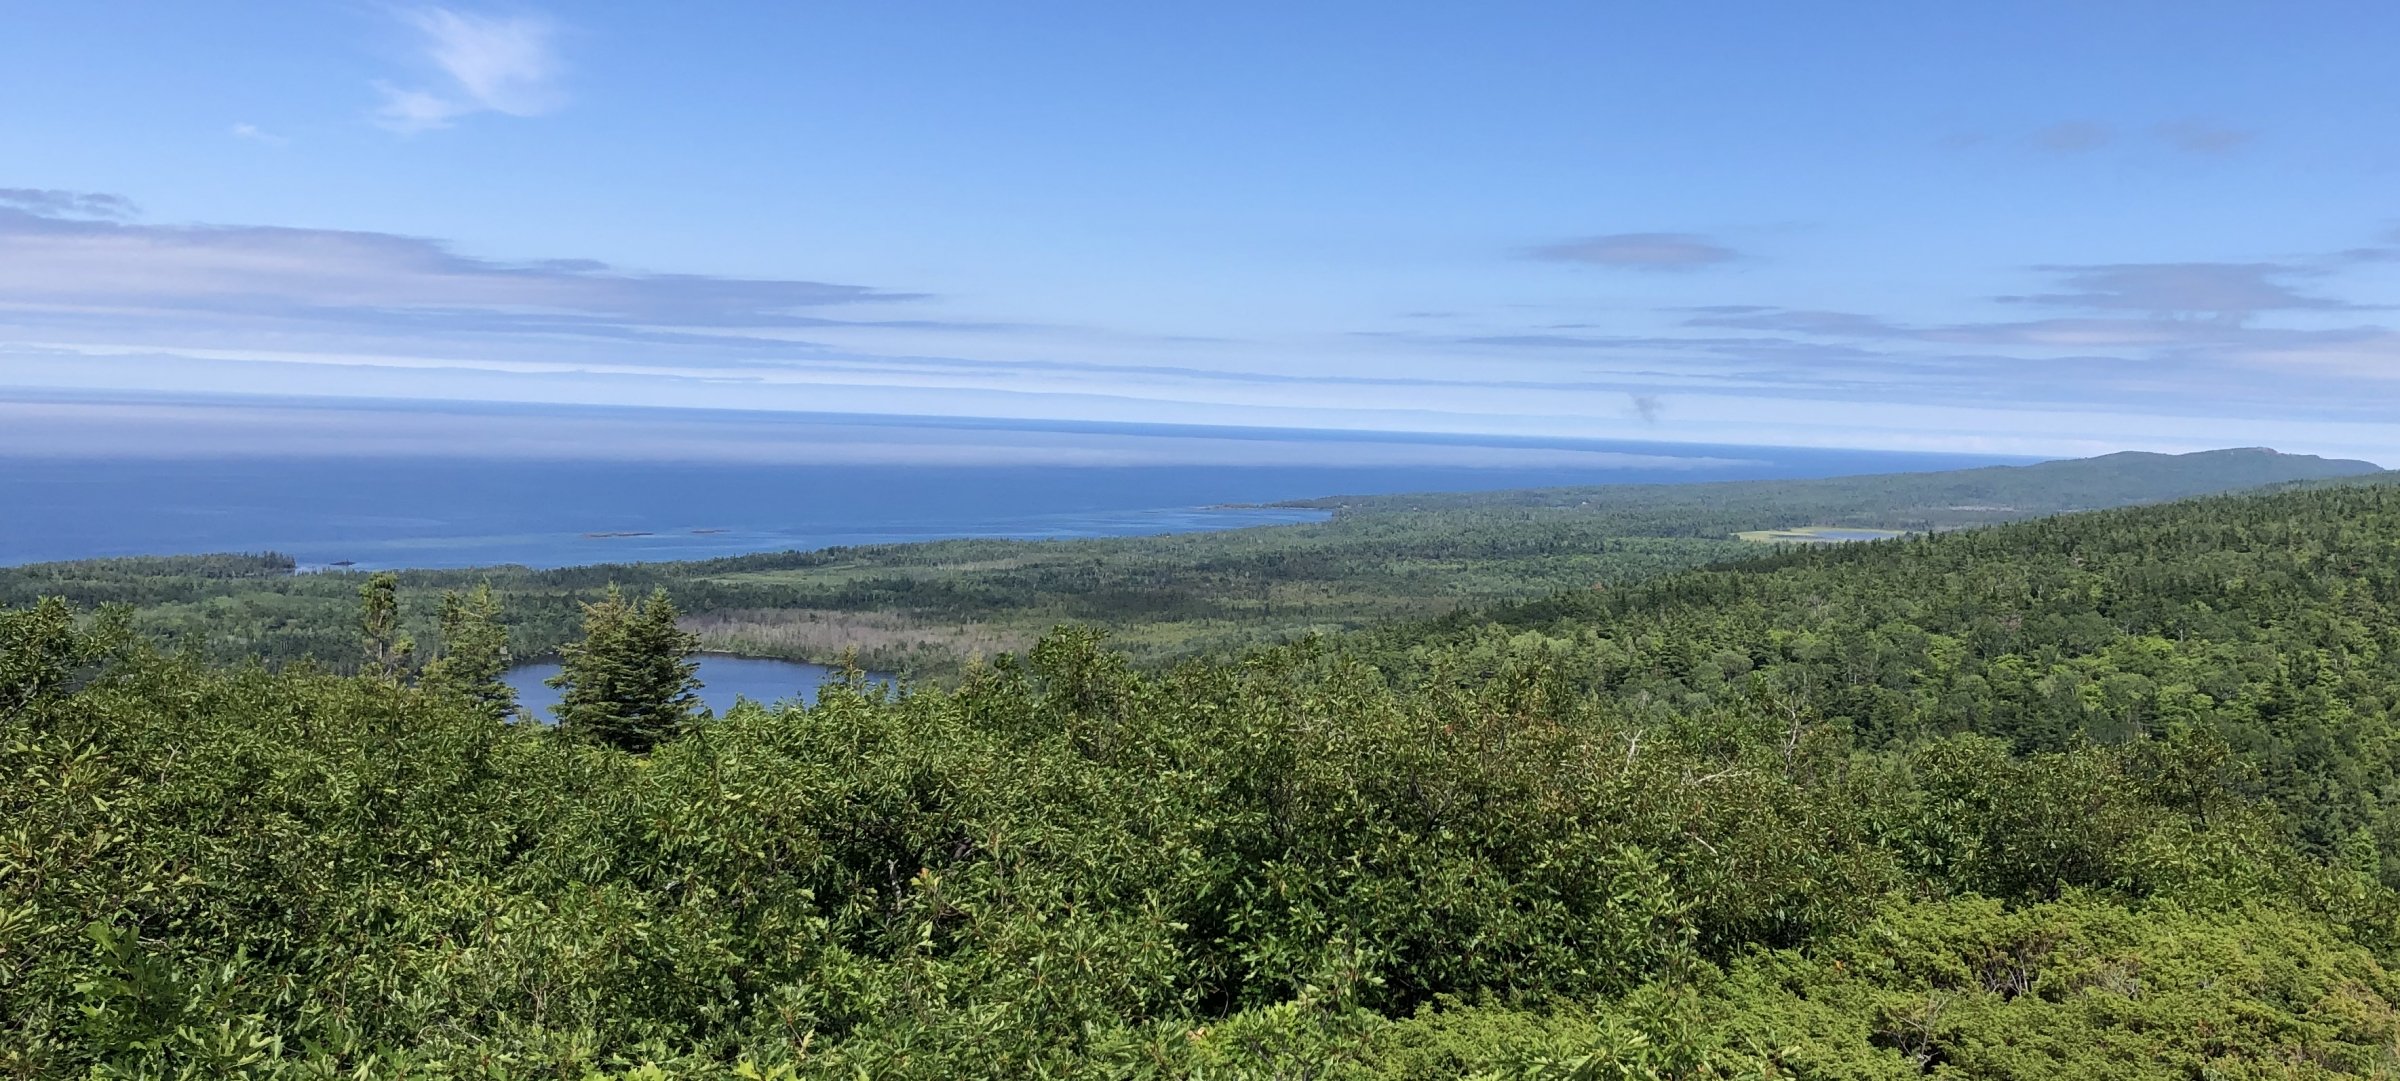 Keweenaw landscape from top of Mt Baldy